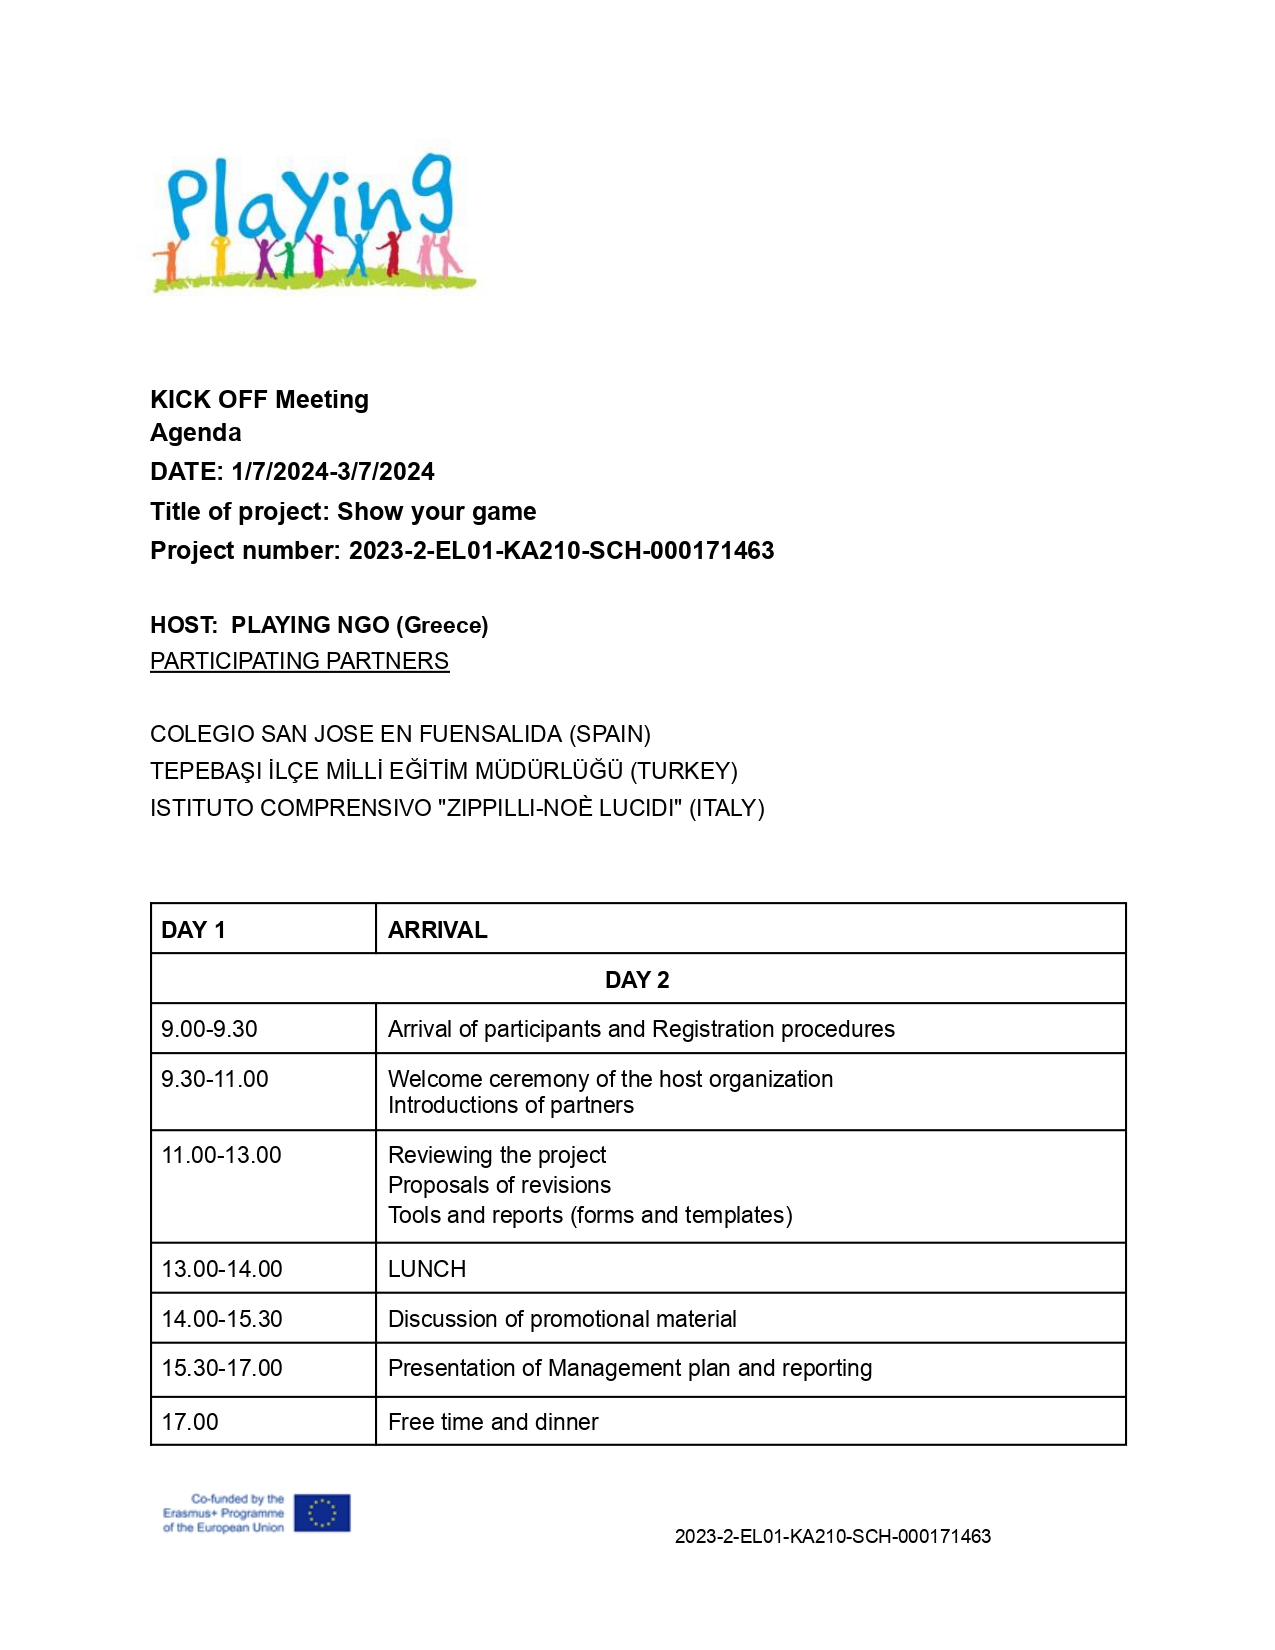 Show your game agenda ATHENS page 0001